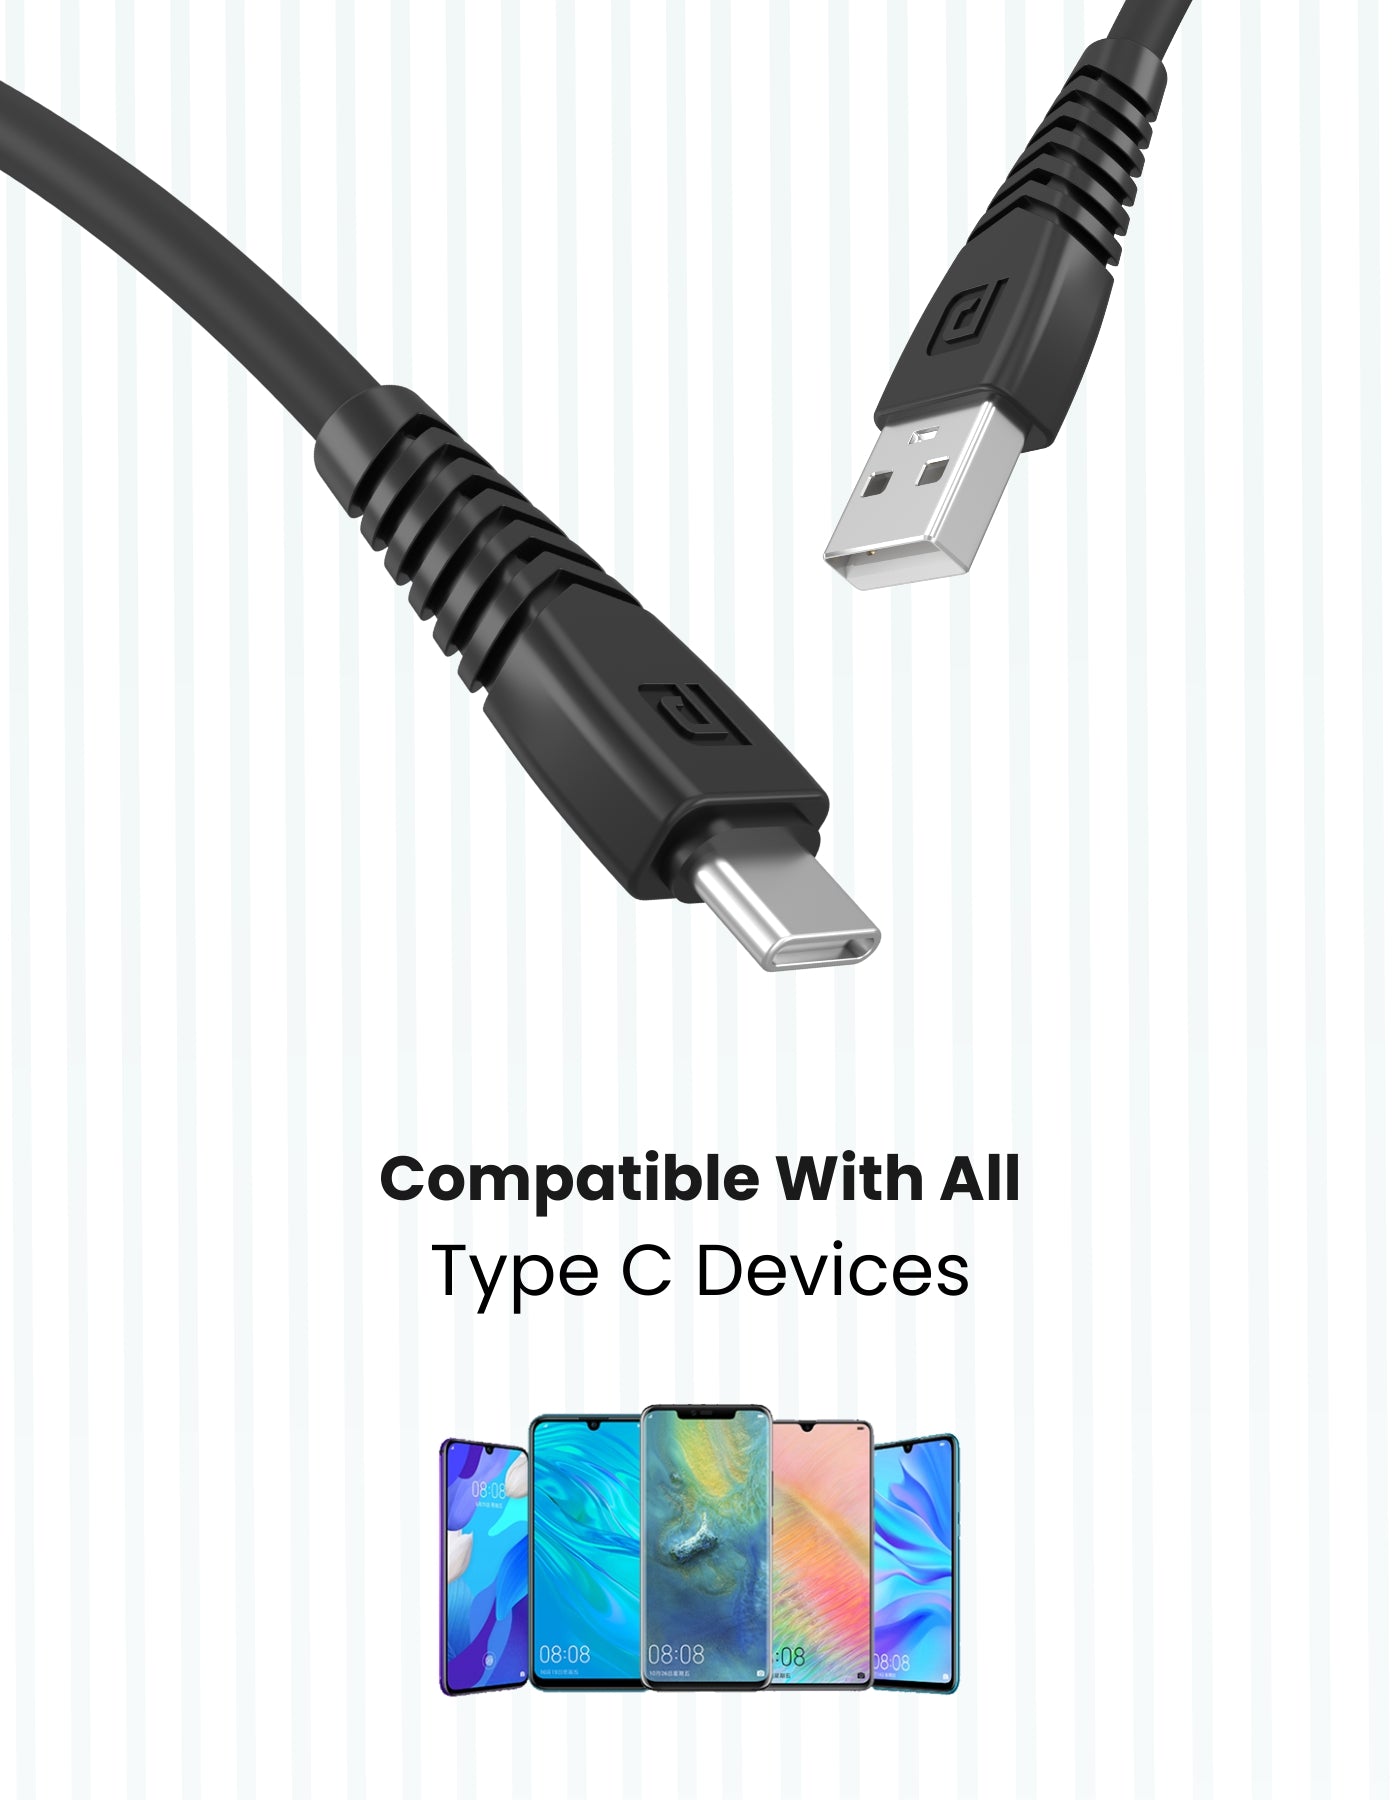 Portronics Konnect Core Type C cable compatible with all c type enable devices